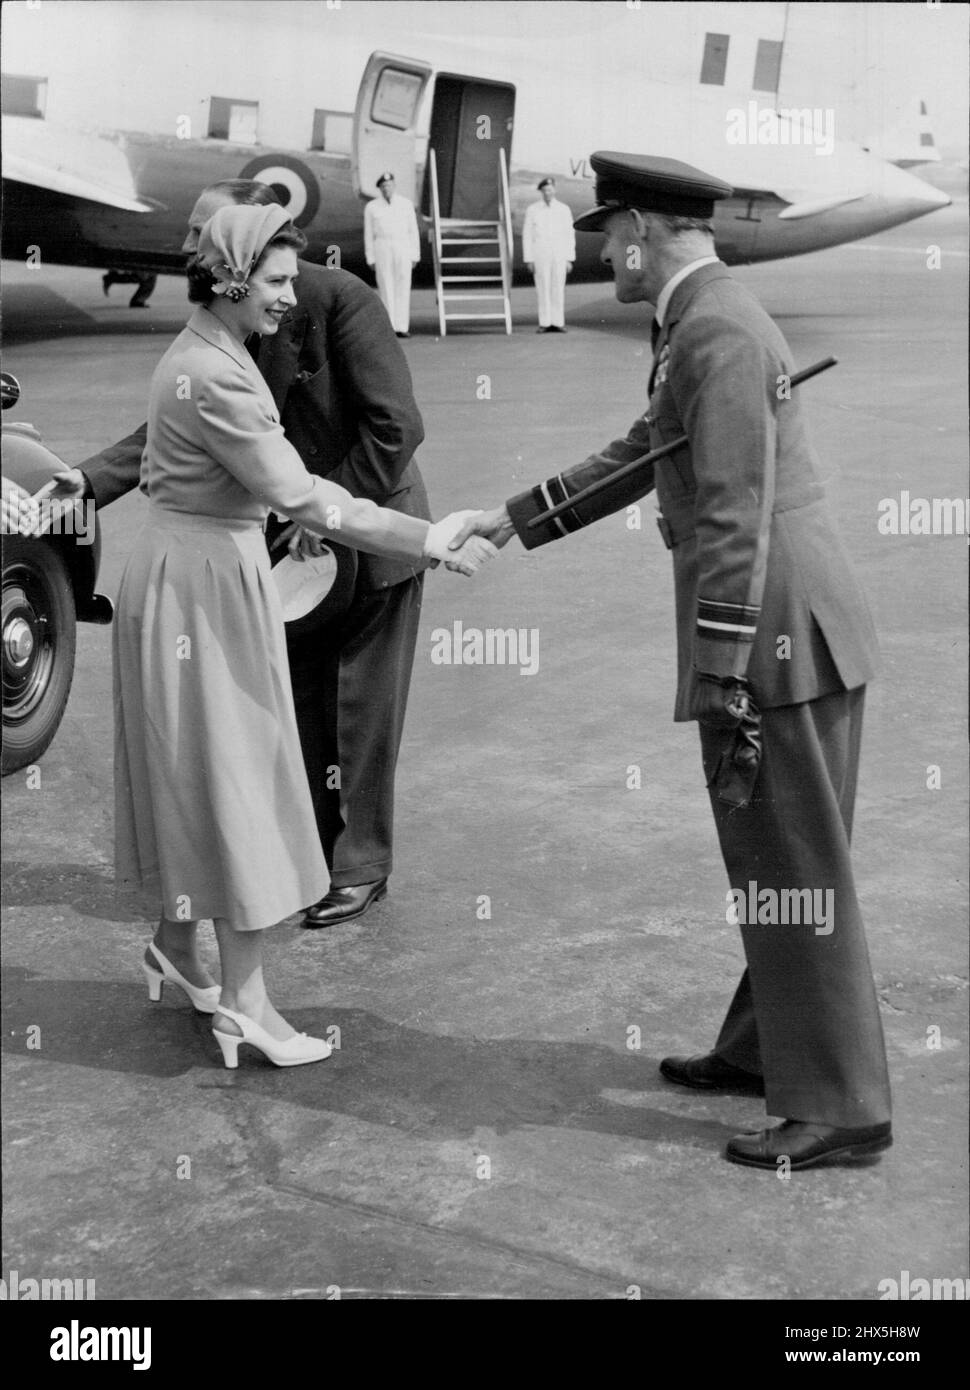 Queen Flies to Ulster. Farewell handshake by the Queen as she was about to leave London Airport to-day (Wednesday) on her State visit to Northern Ireland with the Duke of Edinburgh. The Queen and her husband were flying the Royal Air Force Station, Aldergrove. July 1, 1953. (Photo by Reuterphoto). Stock Photo